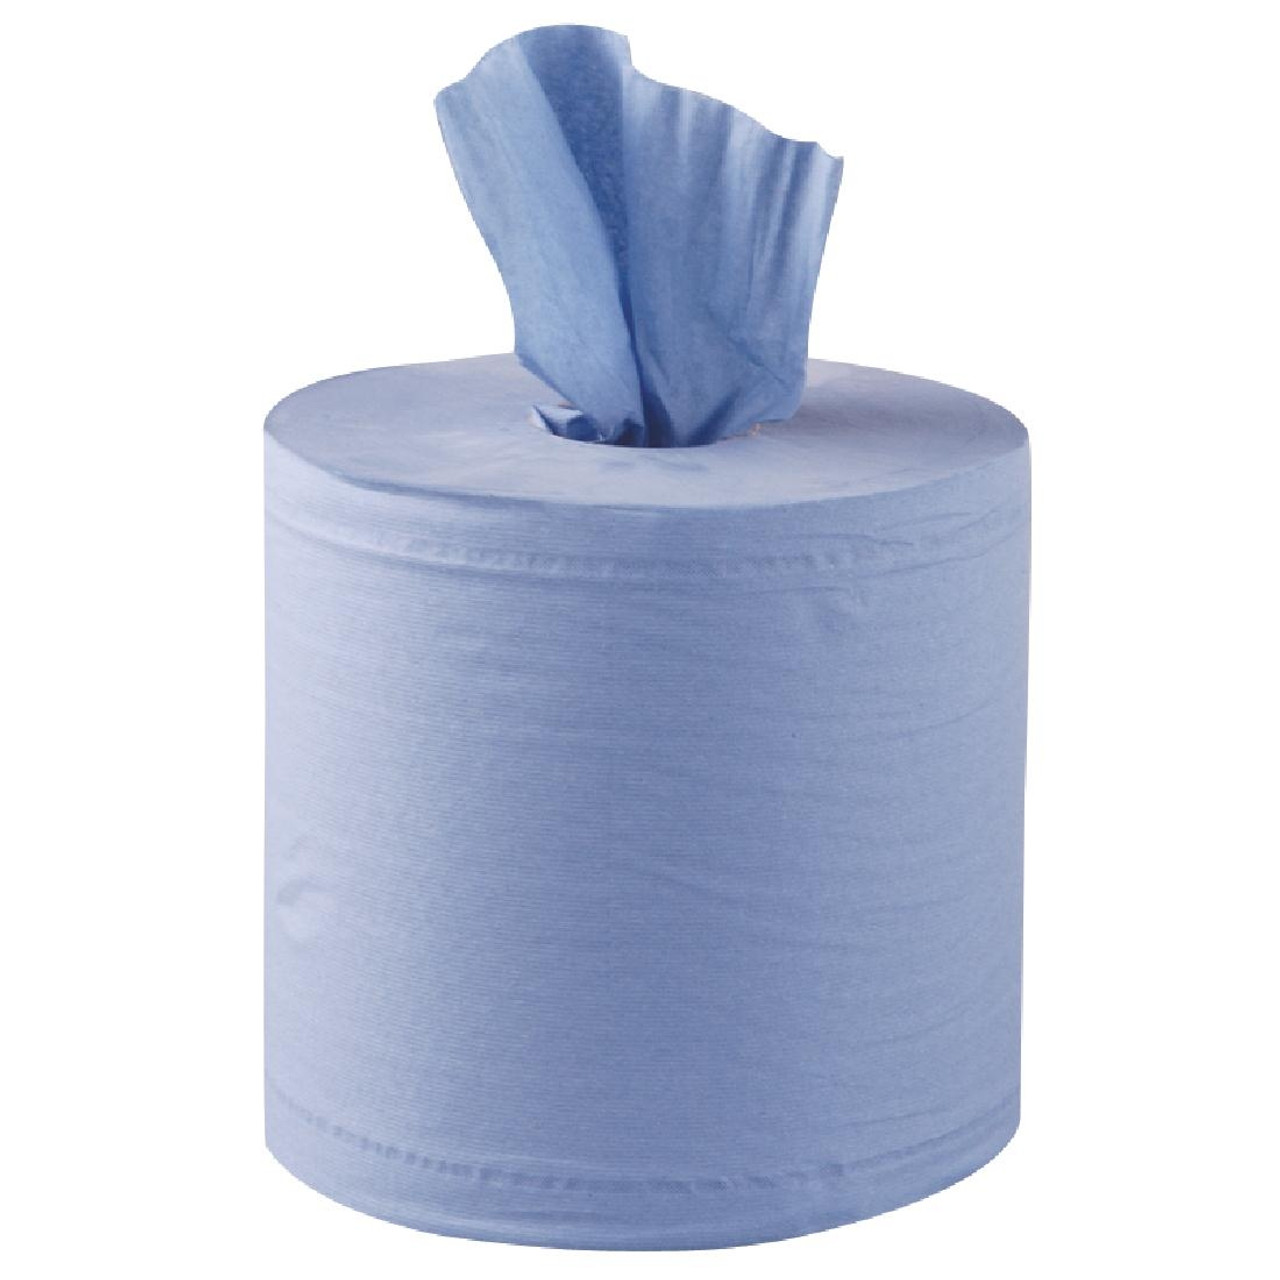 Centre Feed Blue Roll (Case of 6)